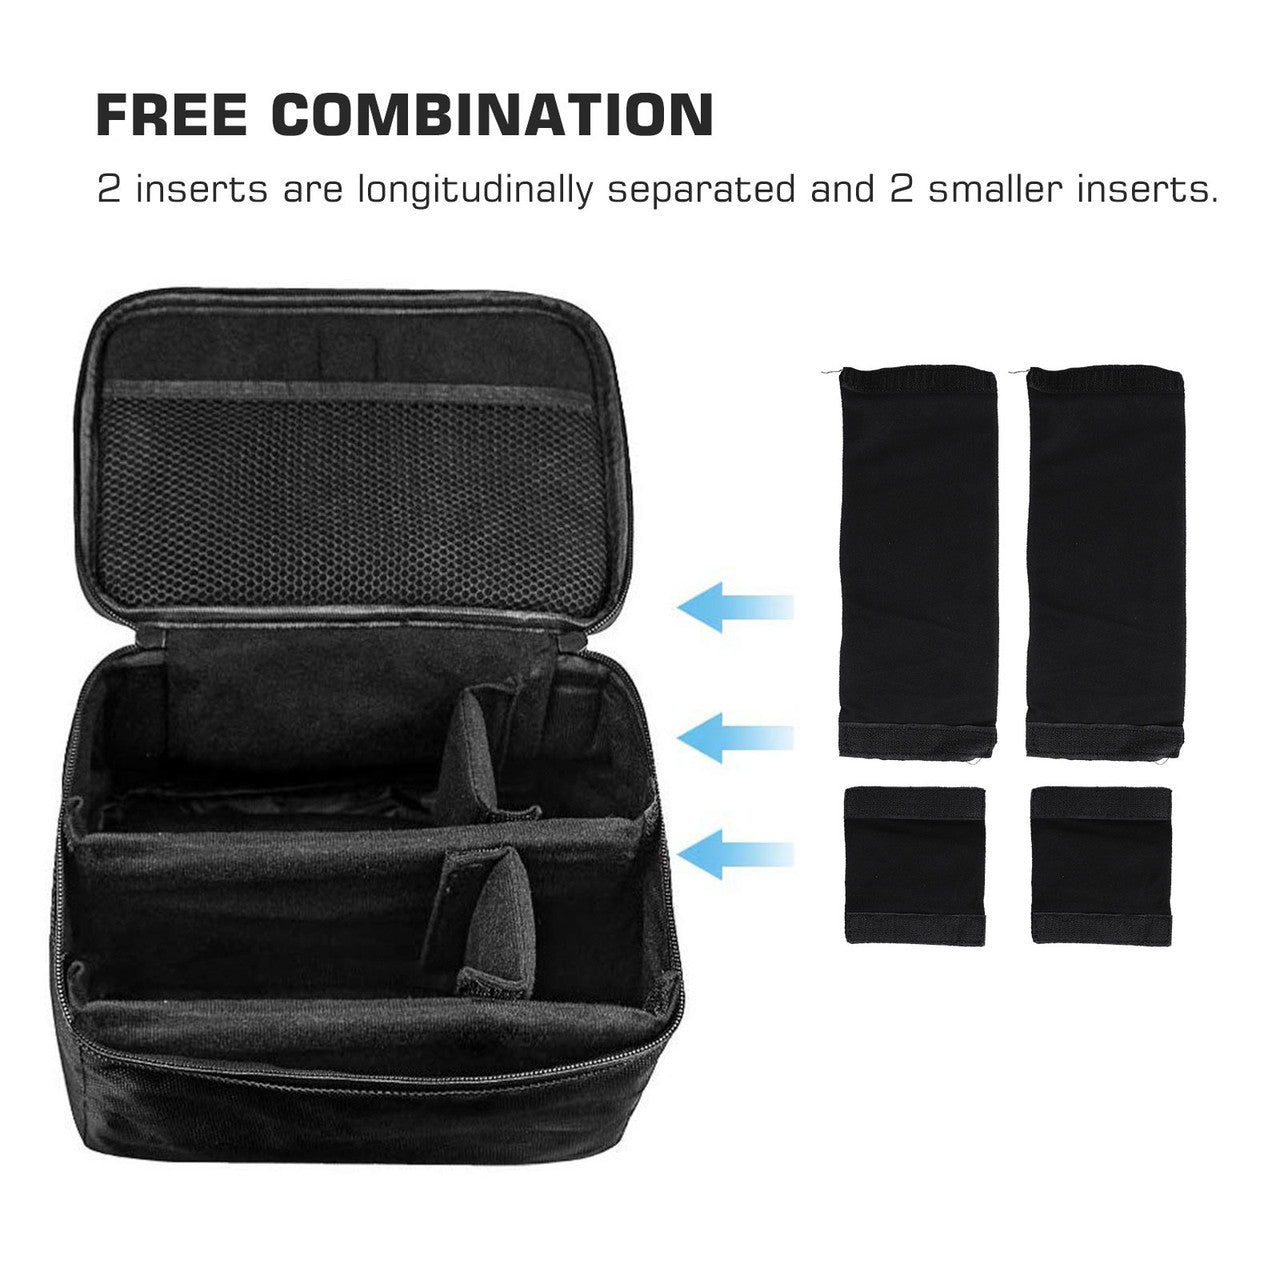 Non-slip and Shockproof Protection Portable Travel Storage Bag Case for Nintendo Switch & Other Accessories, Black